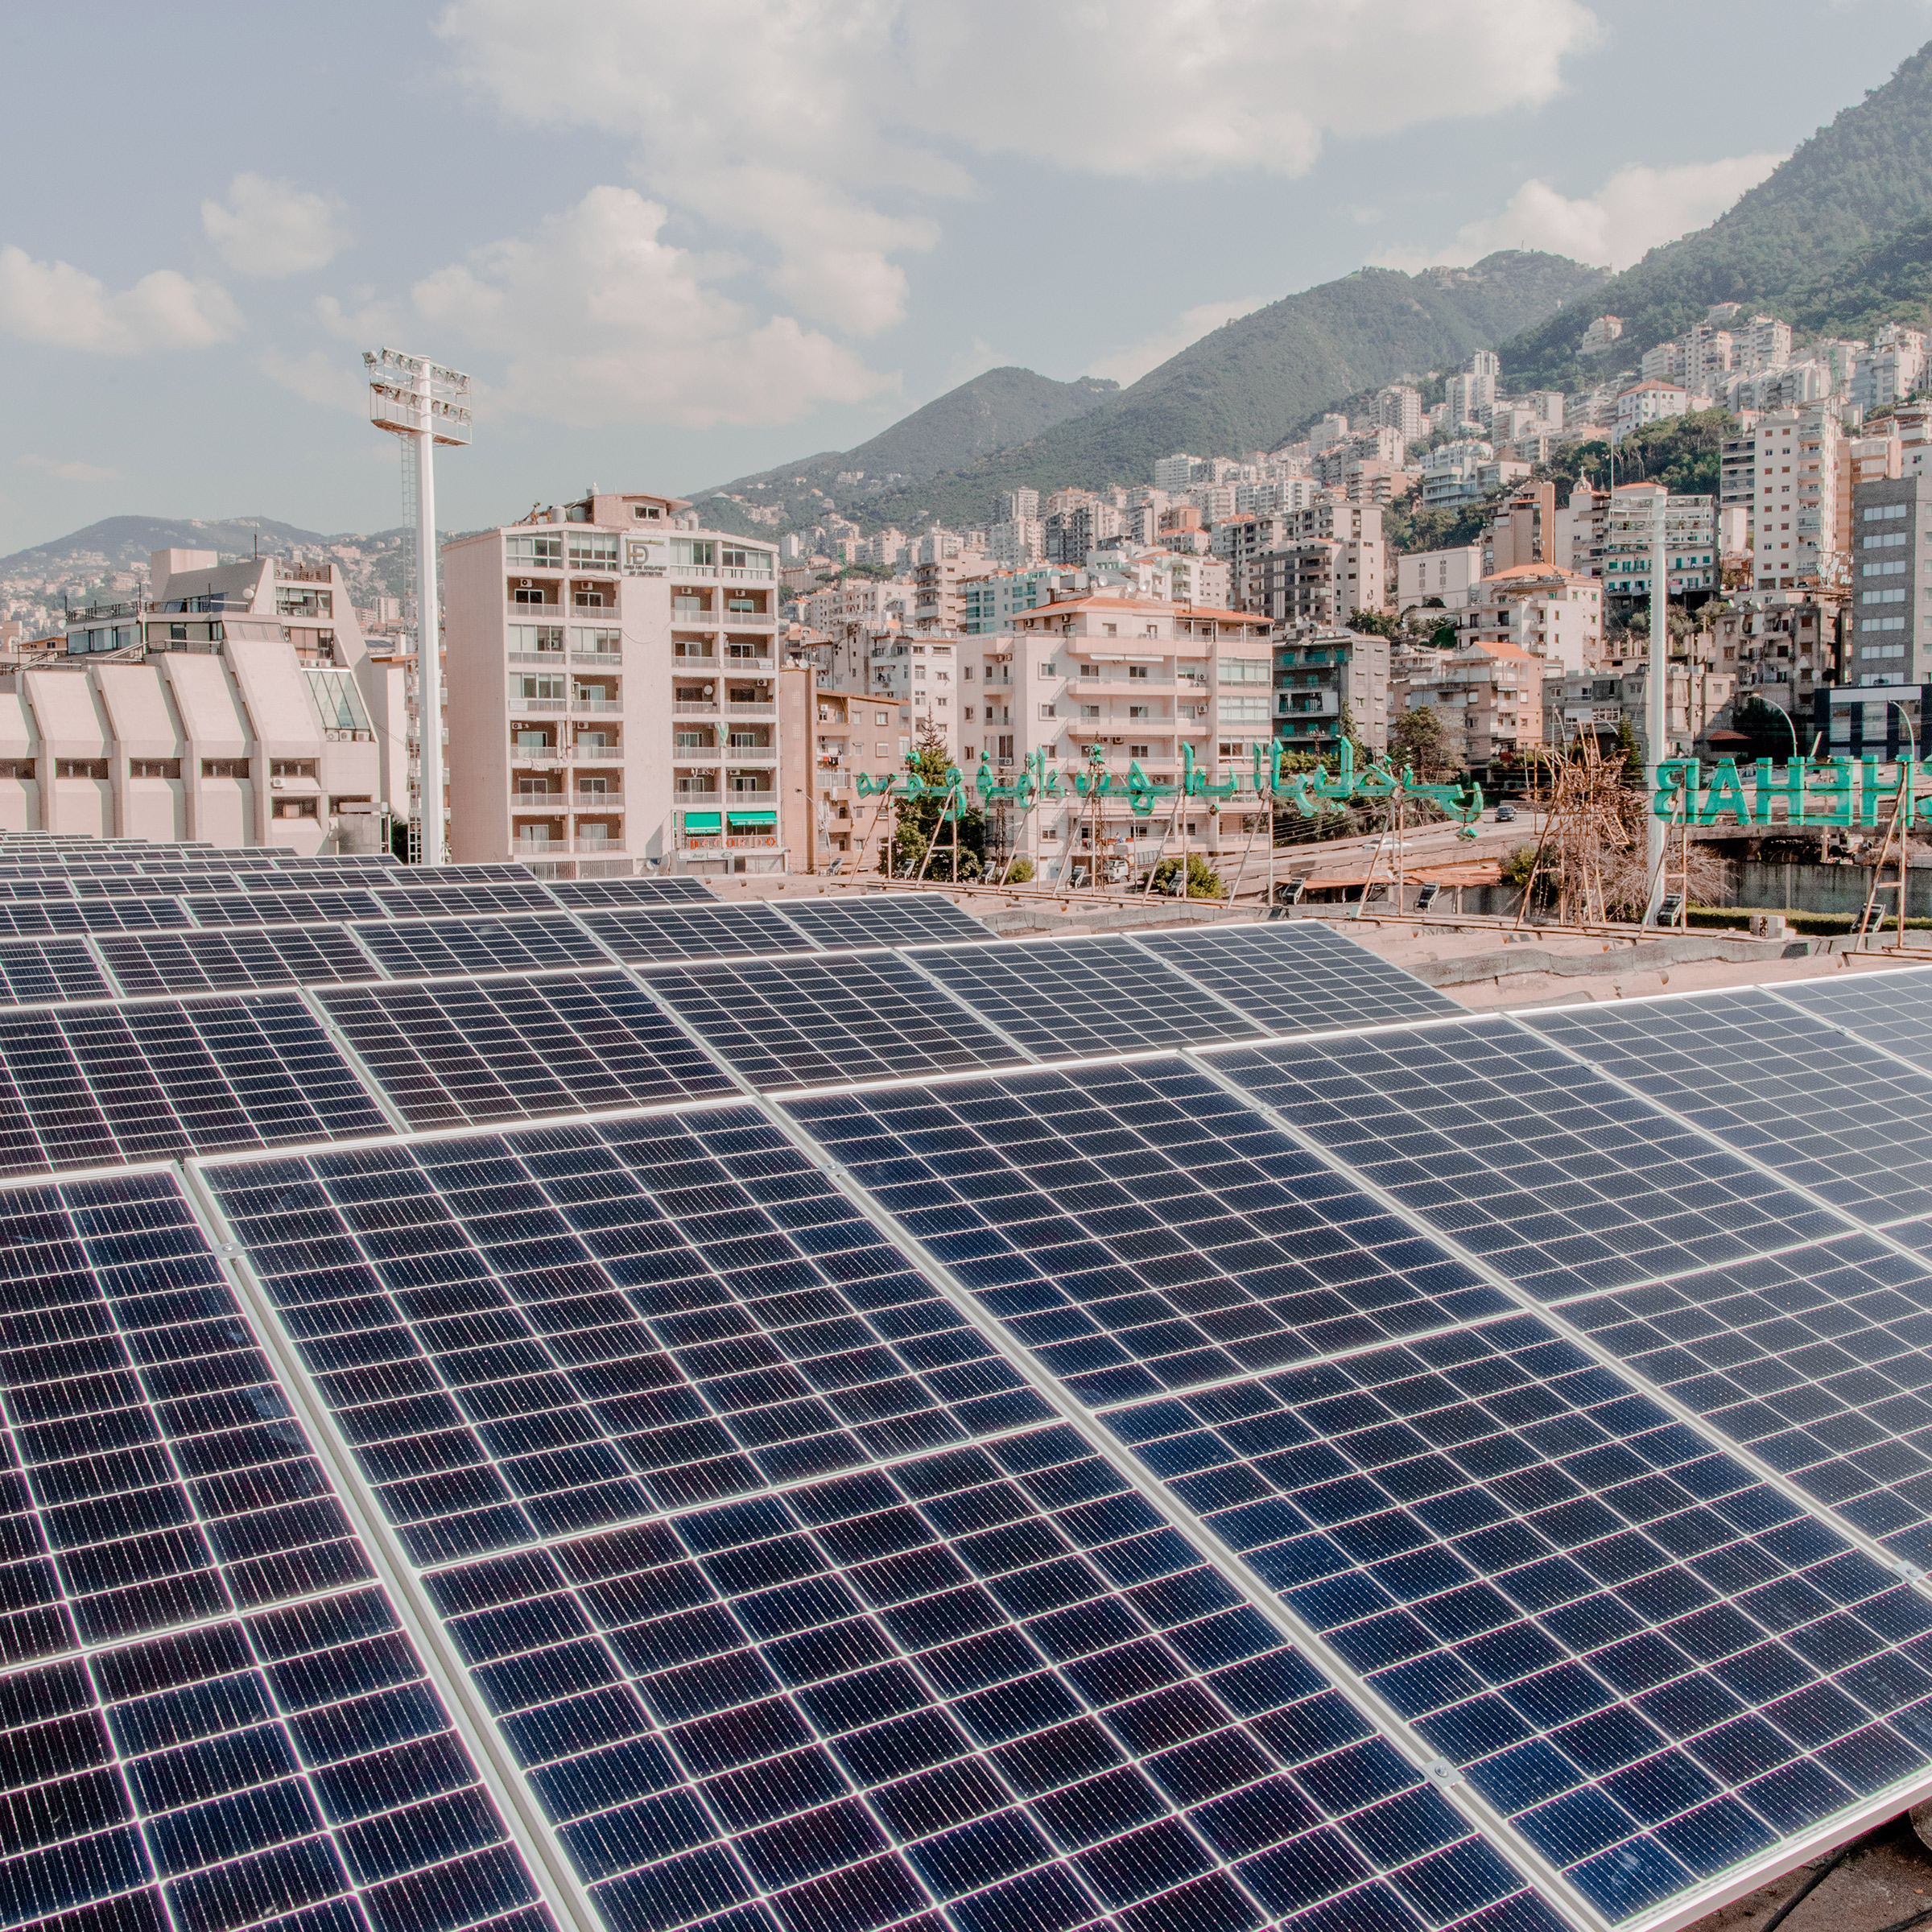 Solar panels installed at the Fouad Chehab stadium. (Myriam Boulos—Magnum Photos for TIME)